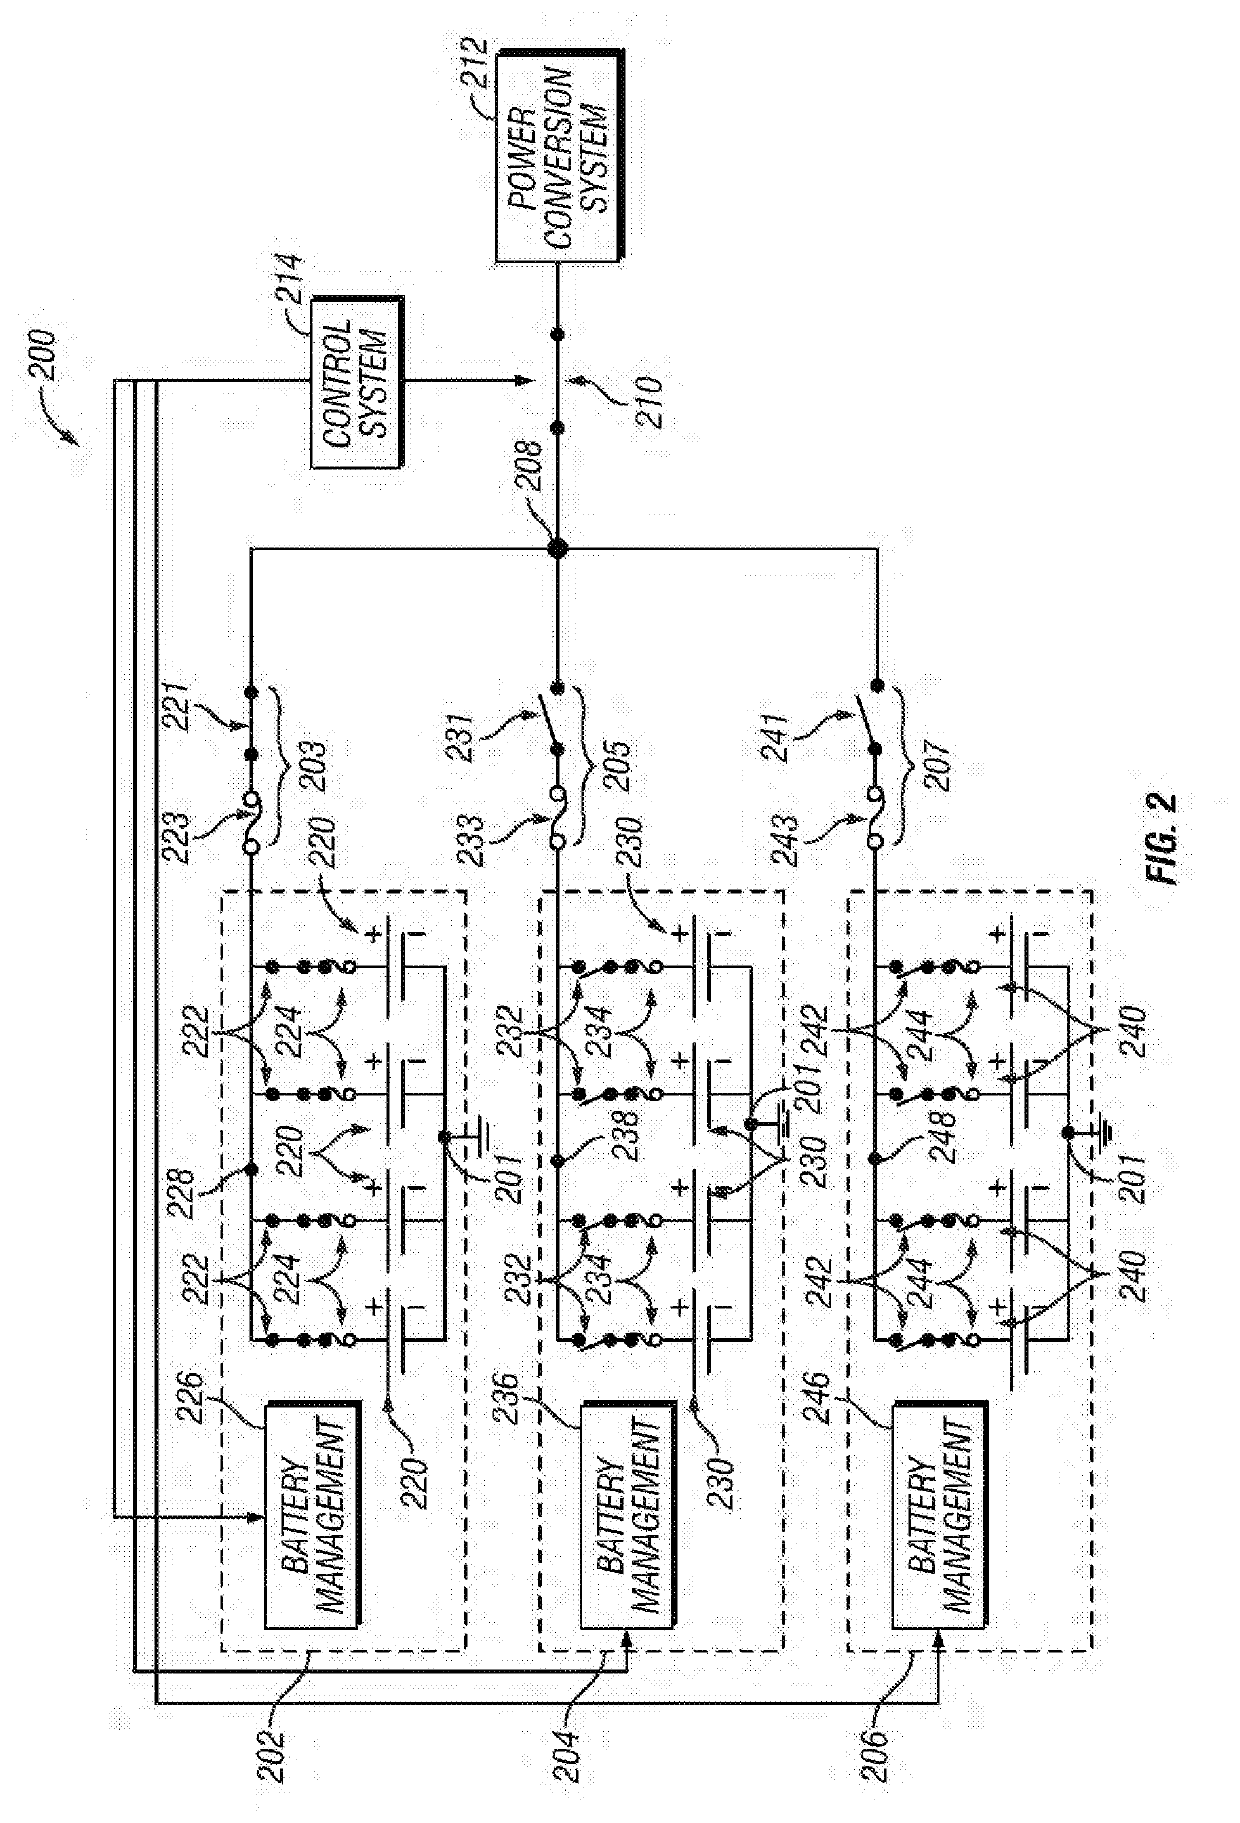 Energy storage systems and methods for fault mitigation